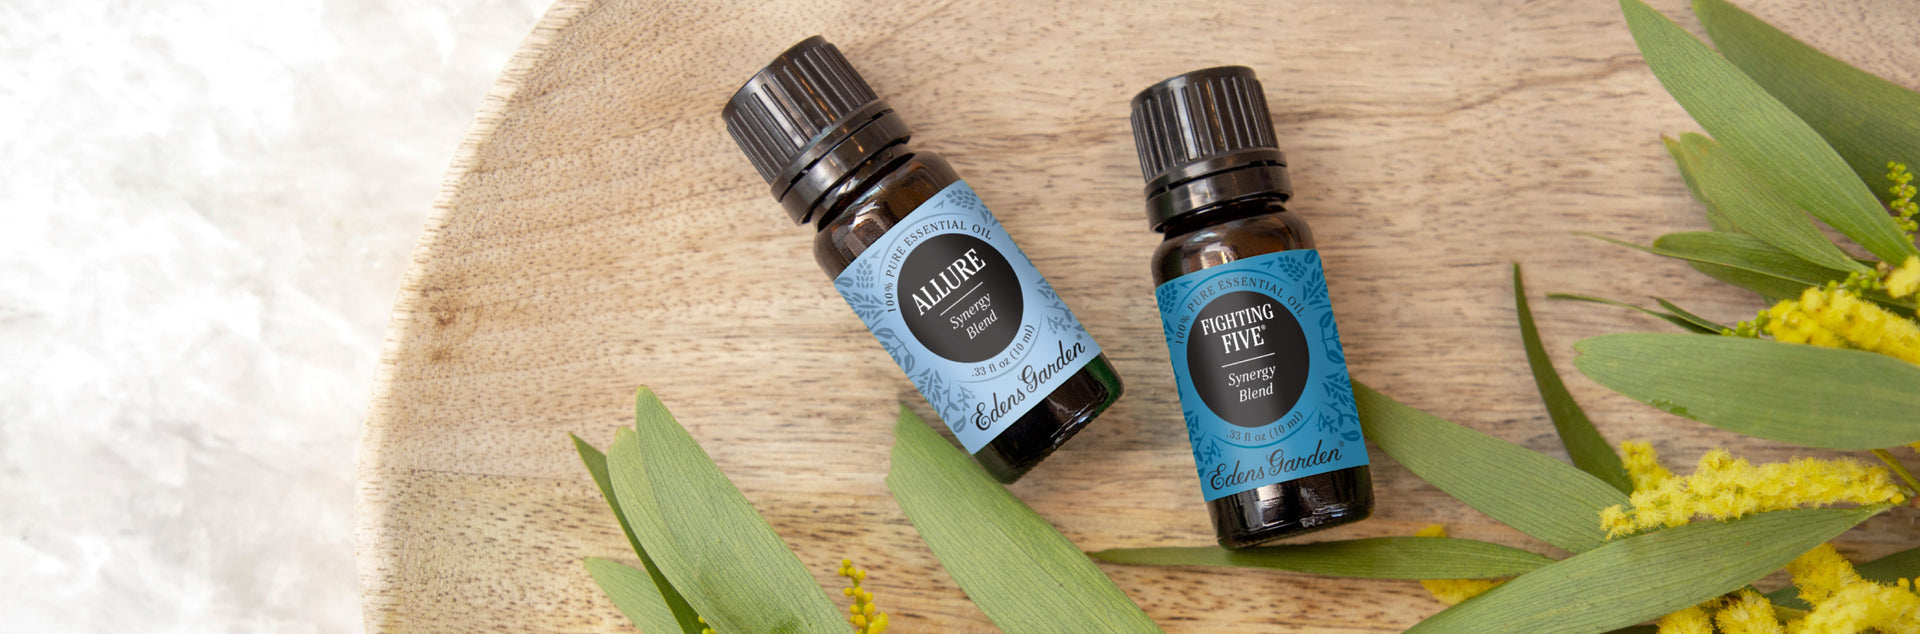 Compare Essential Oil Companies & Blends